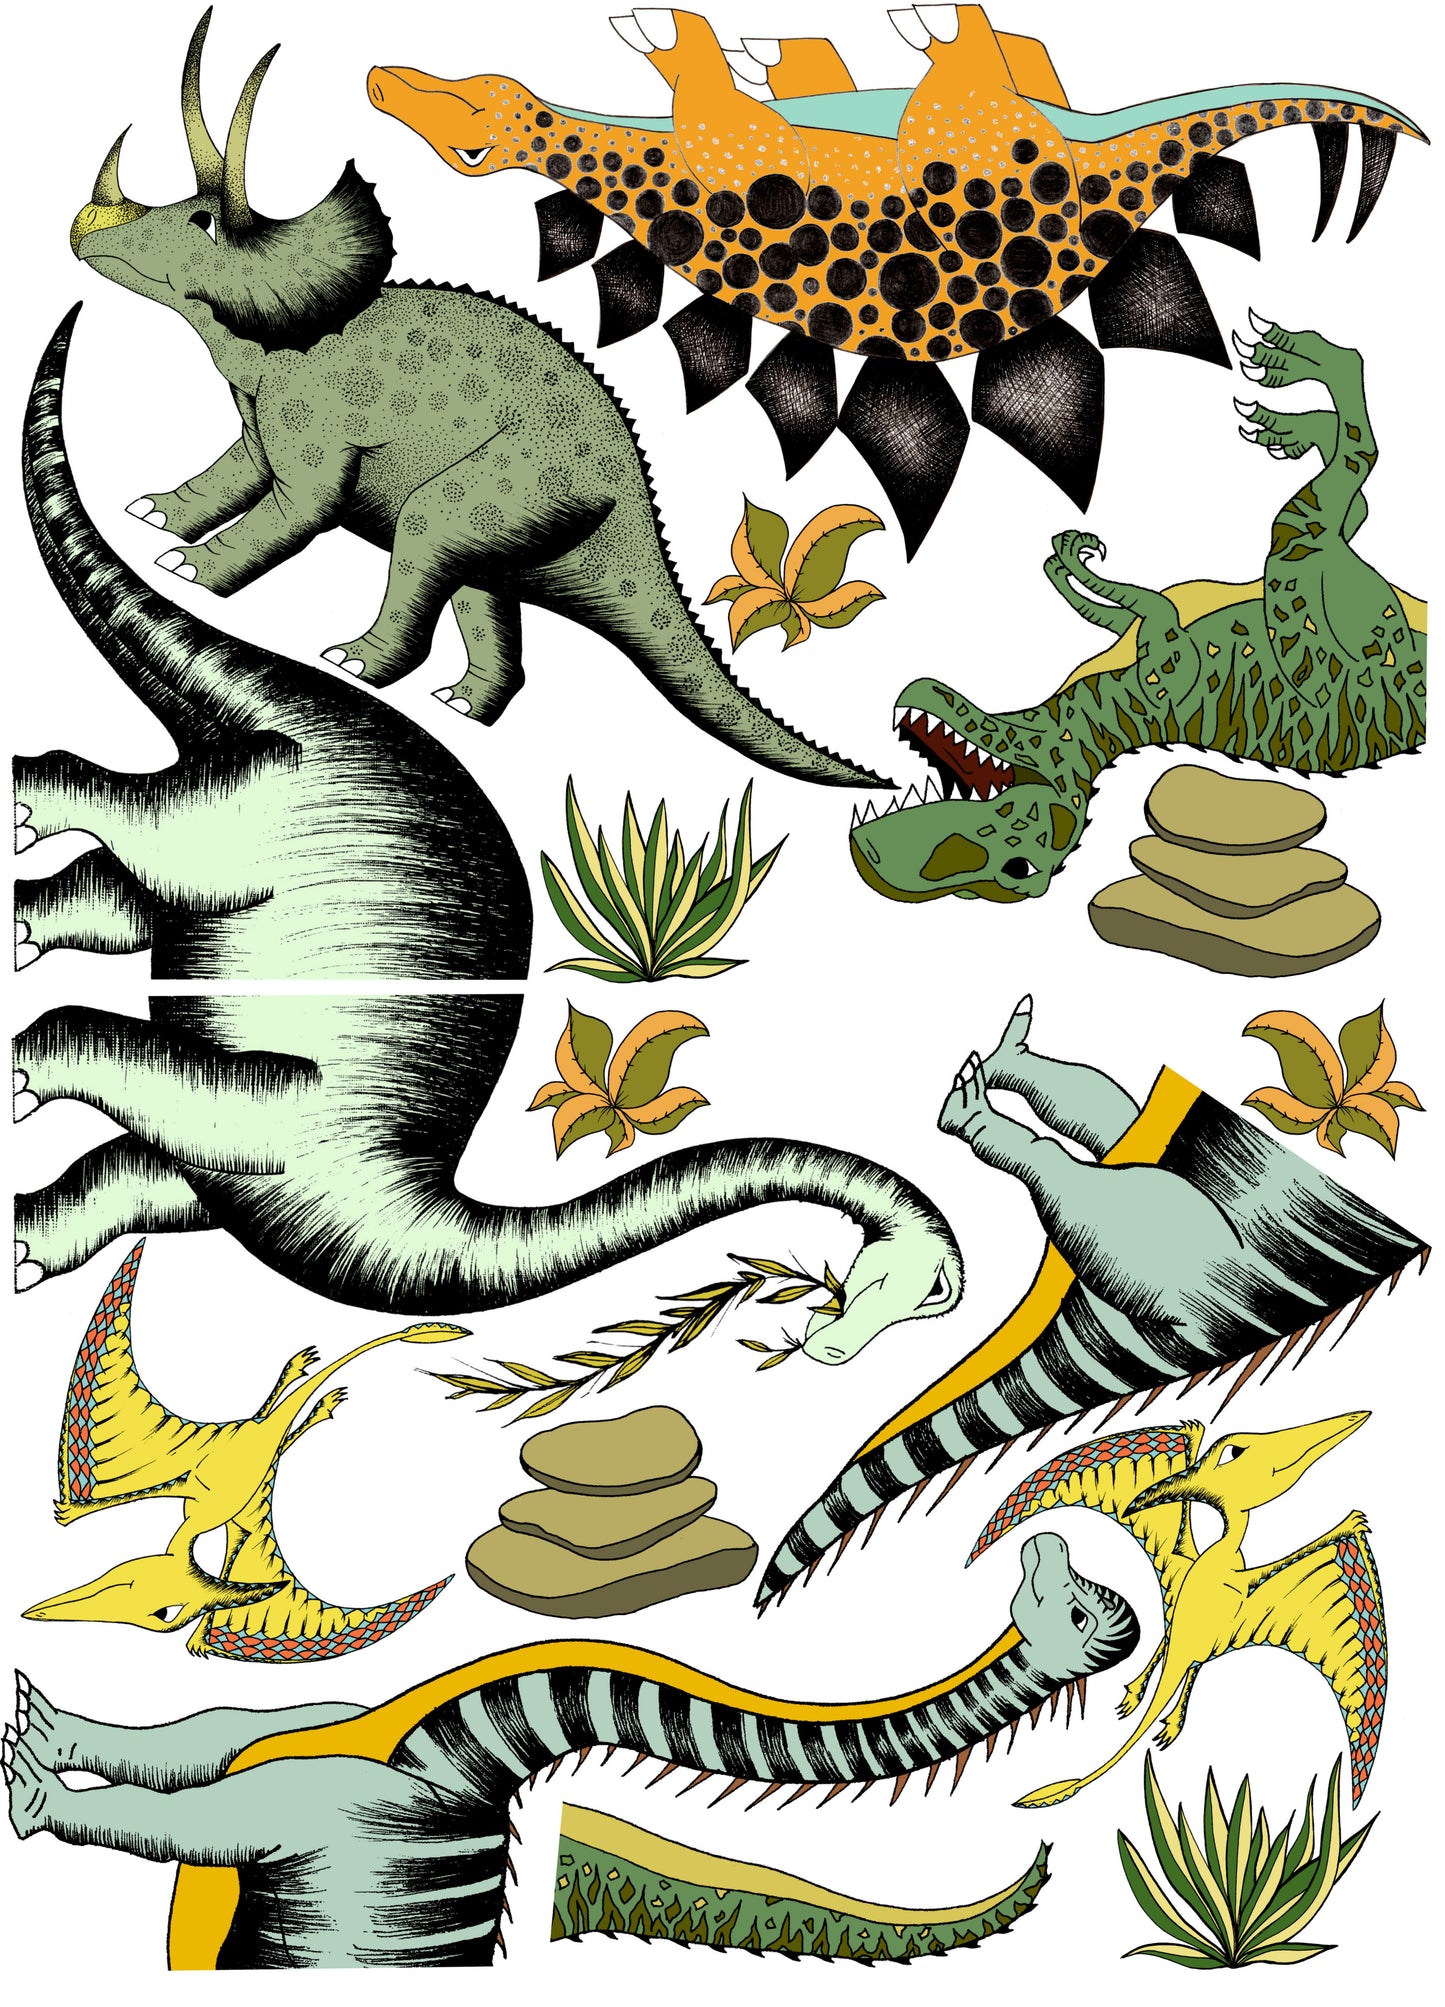 Decal Jungle Super Sized Dinosaur Pack